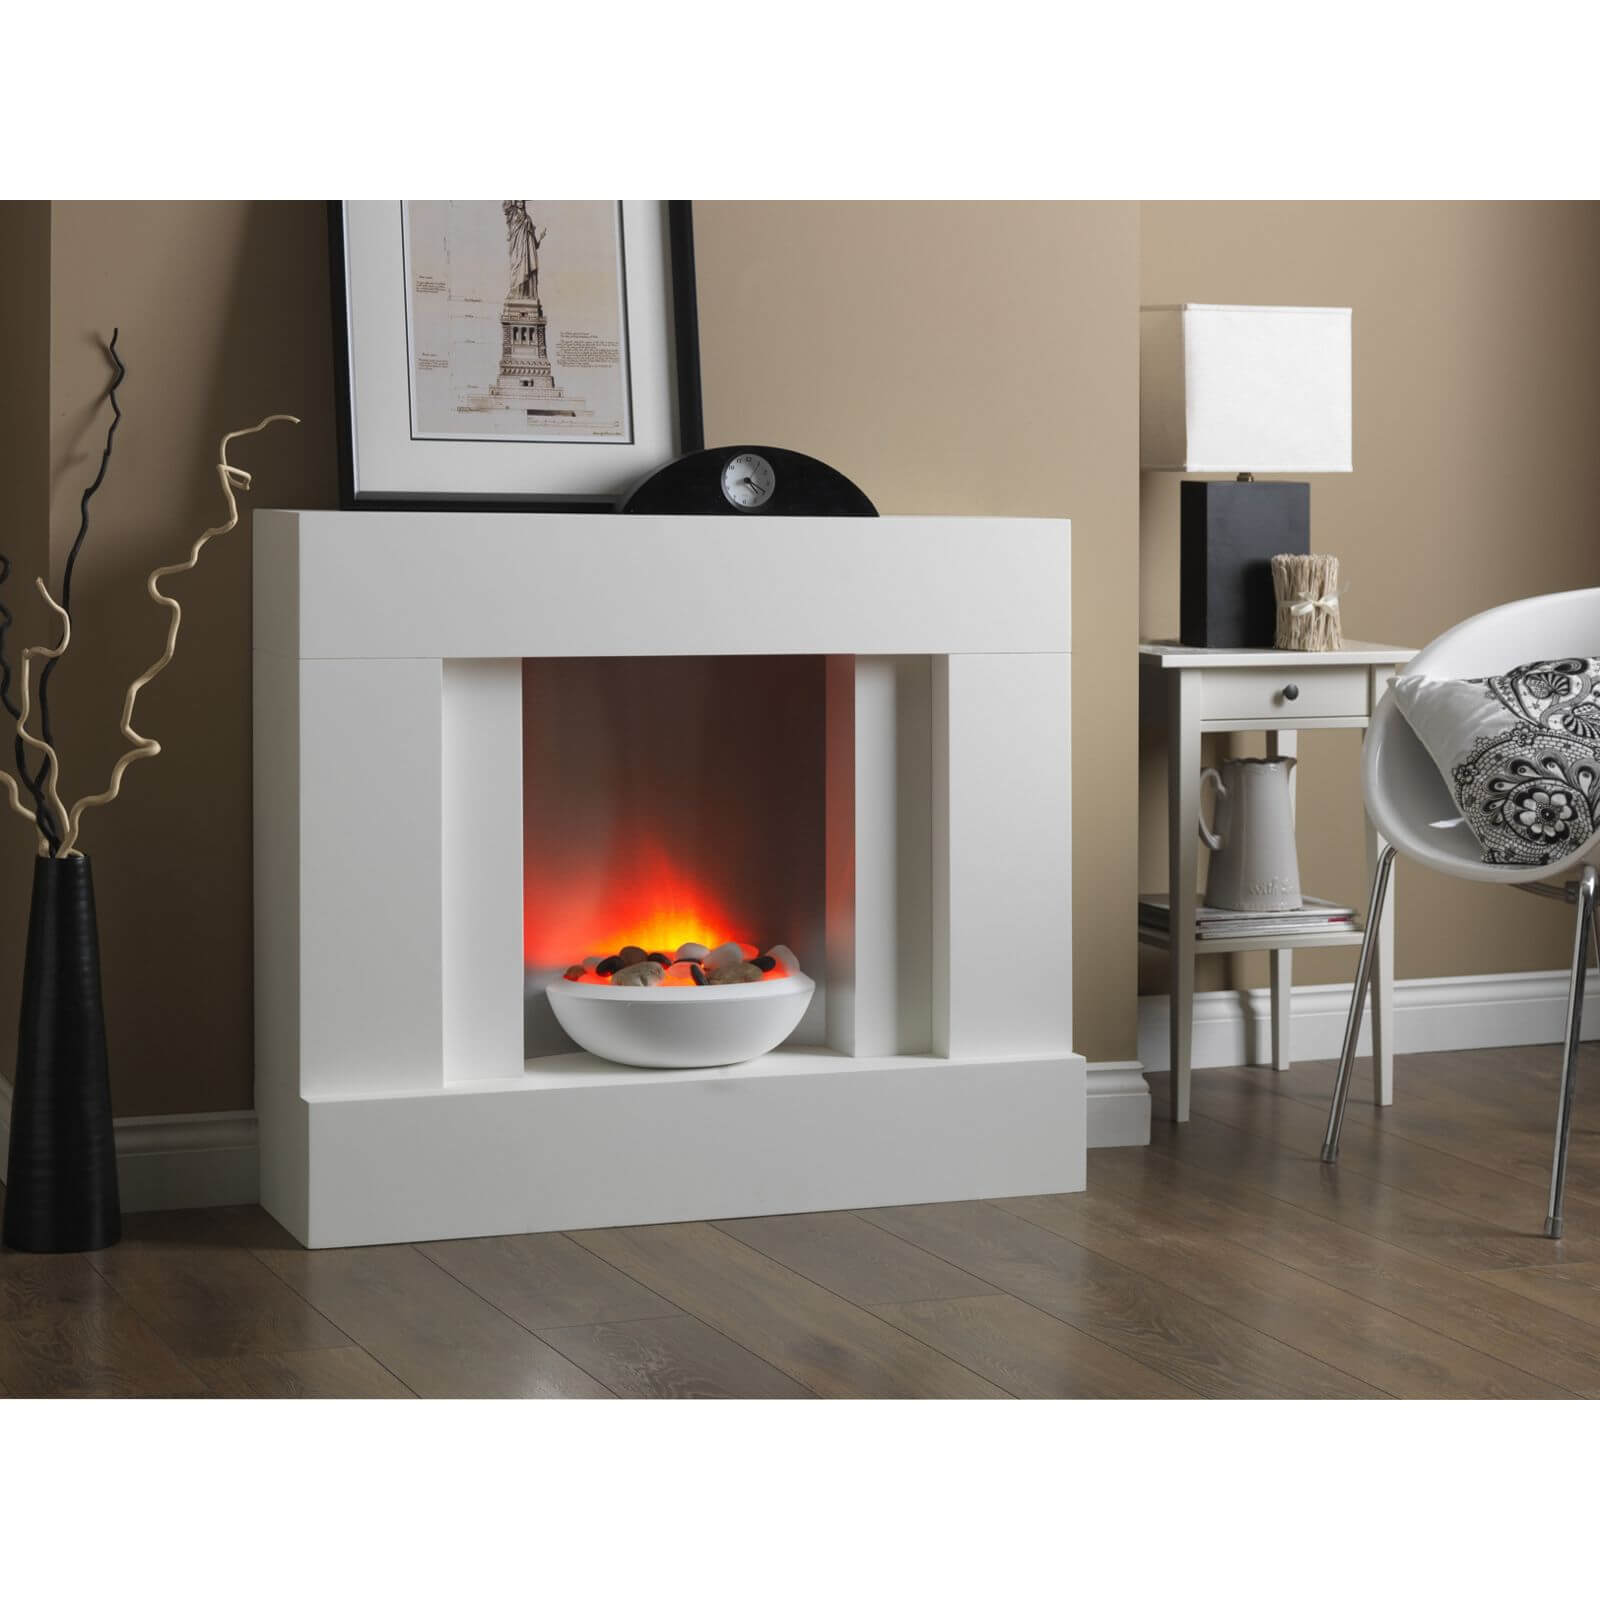 Suncrest Eclipse Electric Fireplace Suite - White